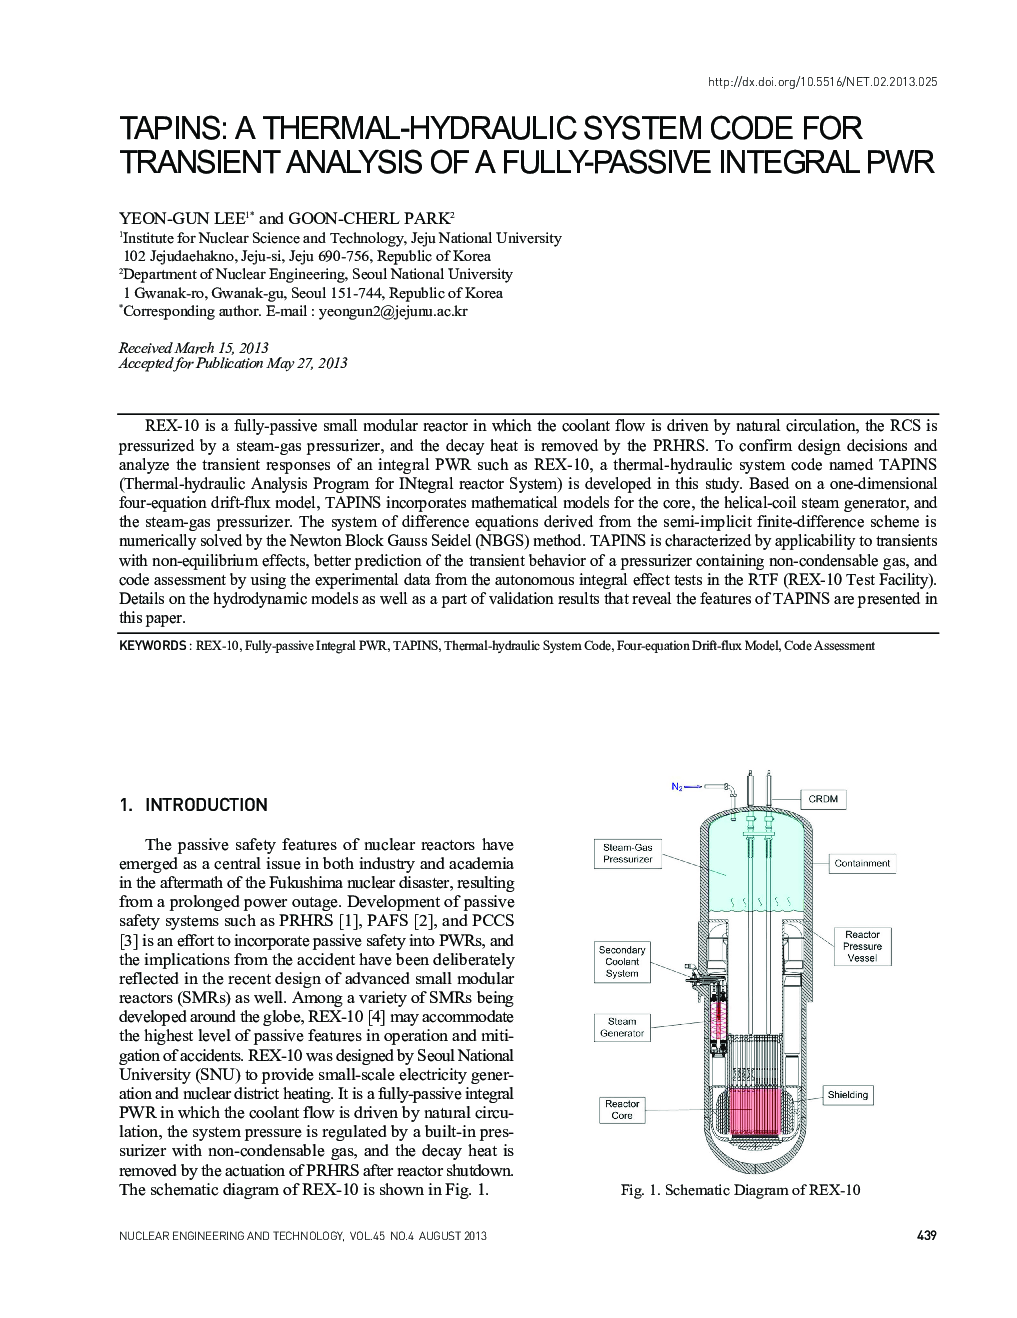 TAPINS: A THERMAL-HYDRAULIC SYSTEM CODE FOR TRANSIENT ANALYSIS OF A FULLY-PASSIVE INTEGRAL PWR